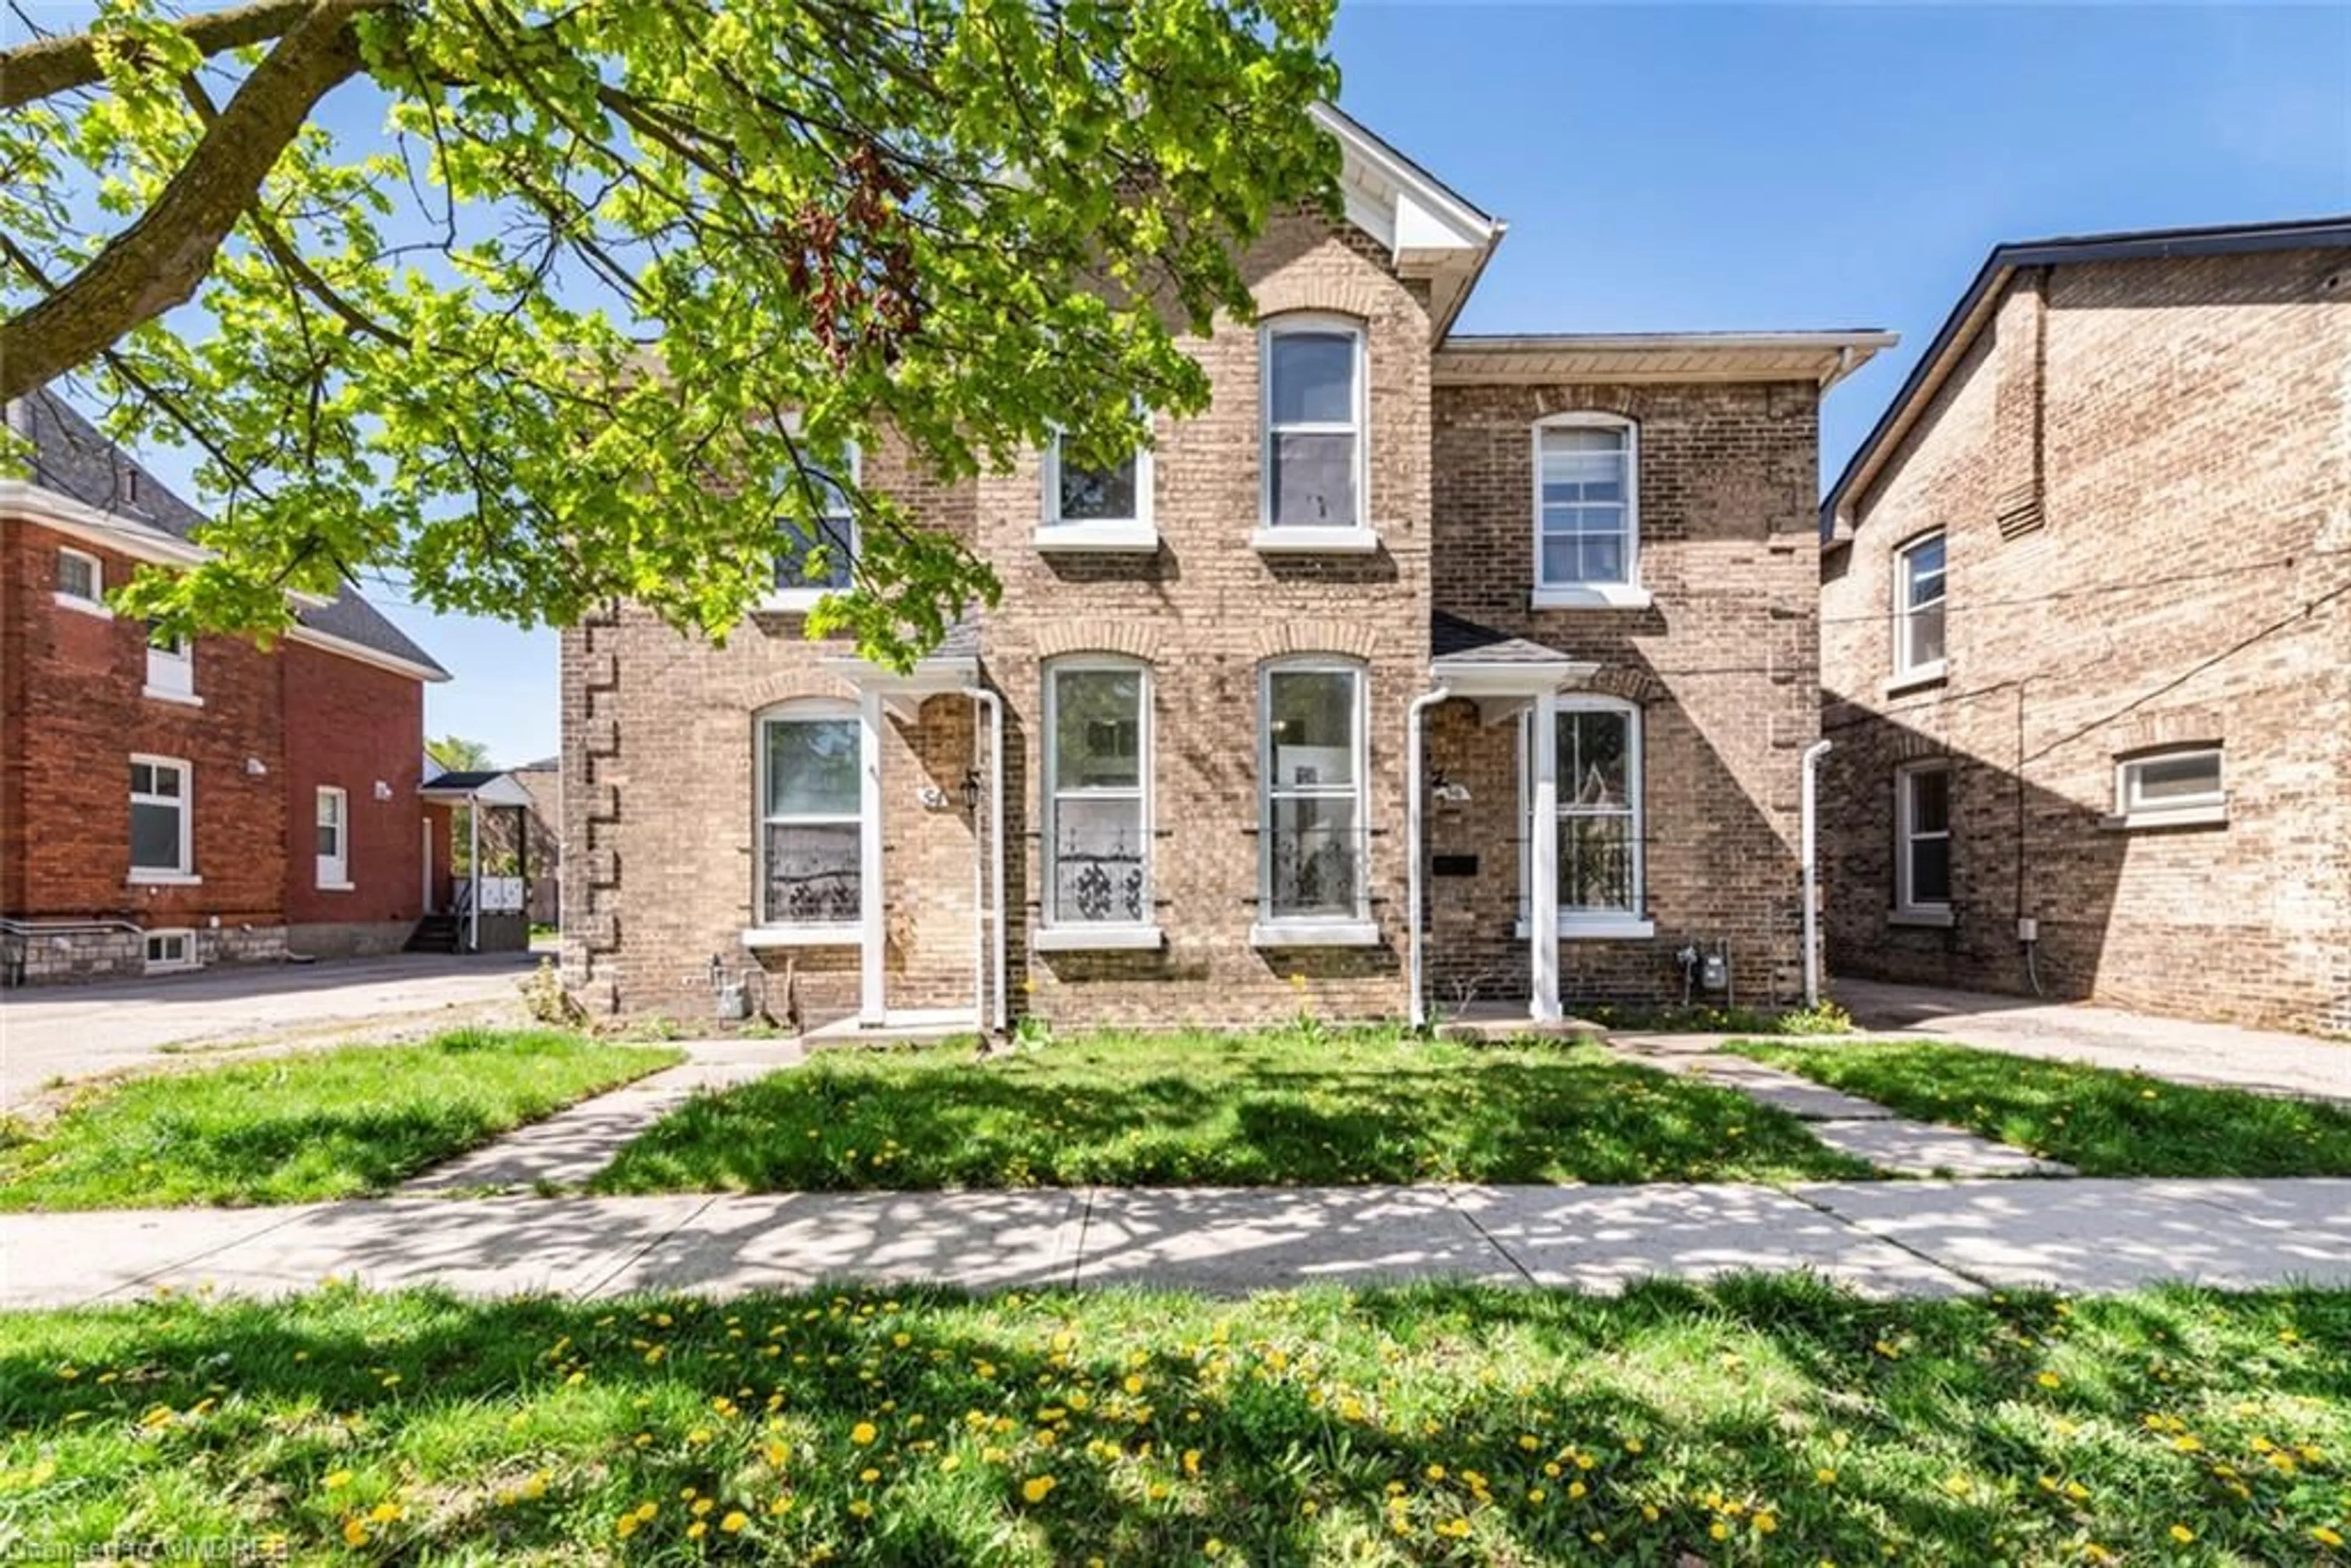 Home with brick exterior material for 54 William St #56, Brantford Ontario N3T 3K5